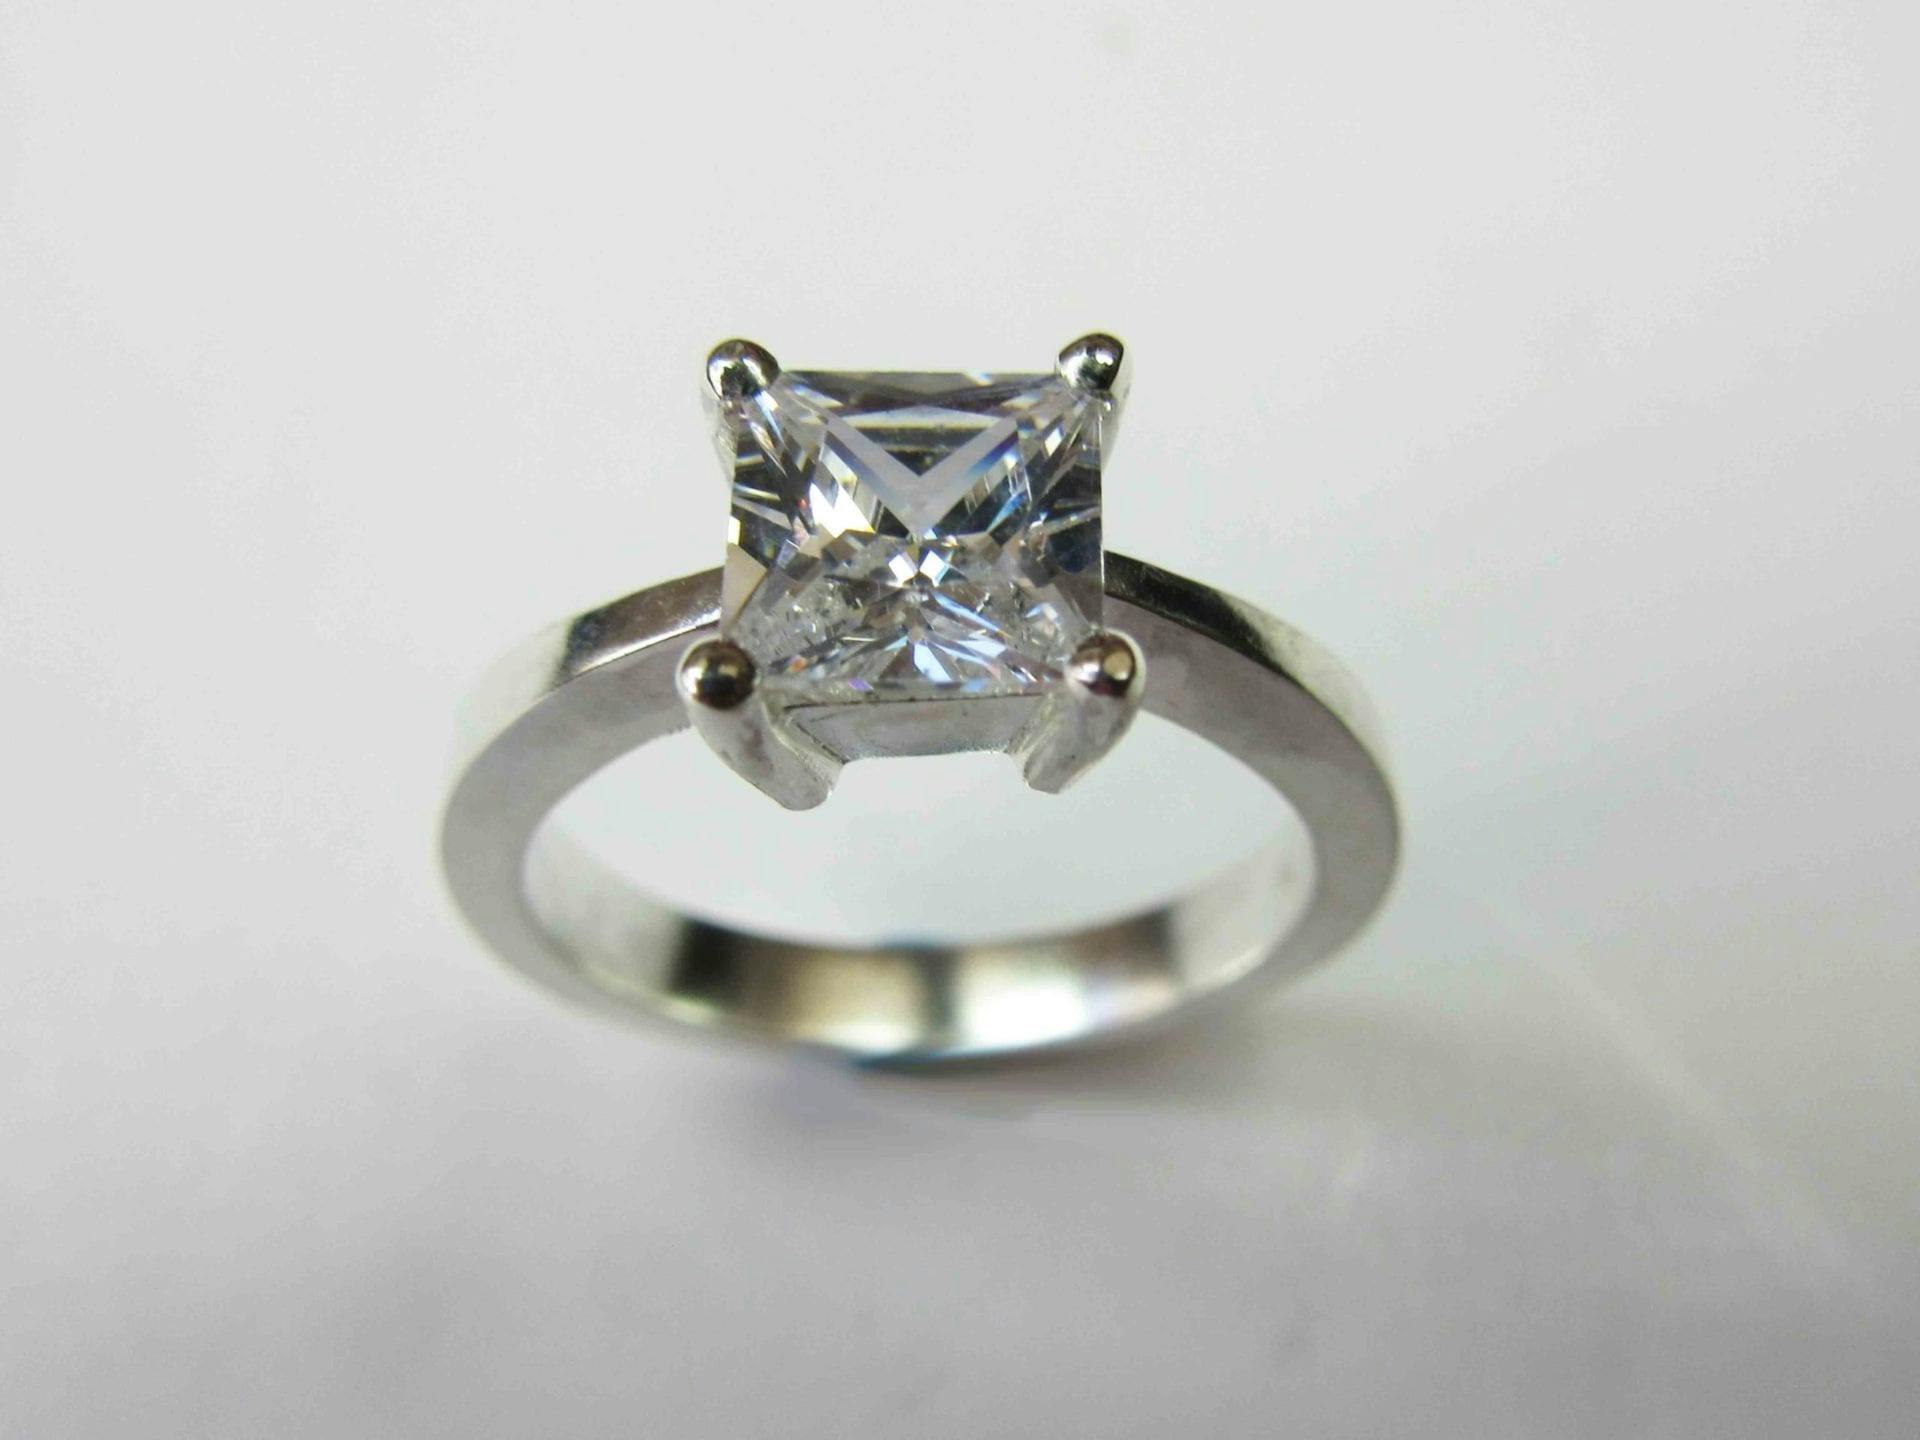 How to Make a Square 4-Prong Claw Setting Solitaire Ring